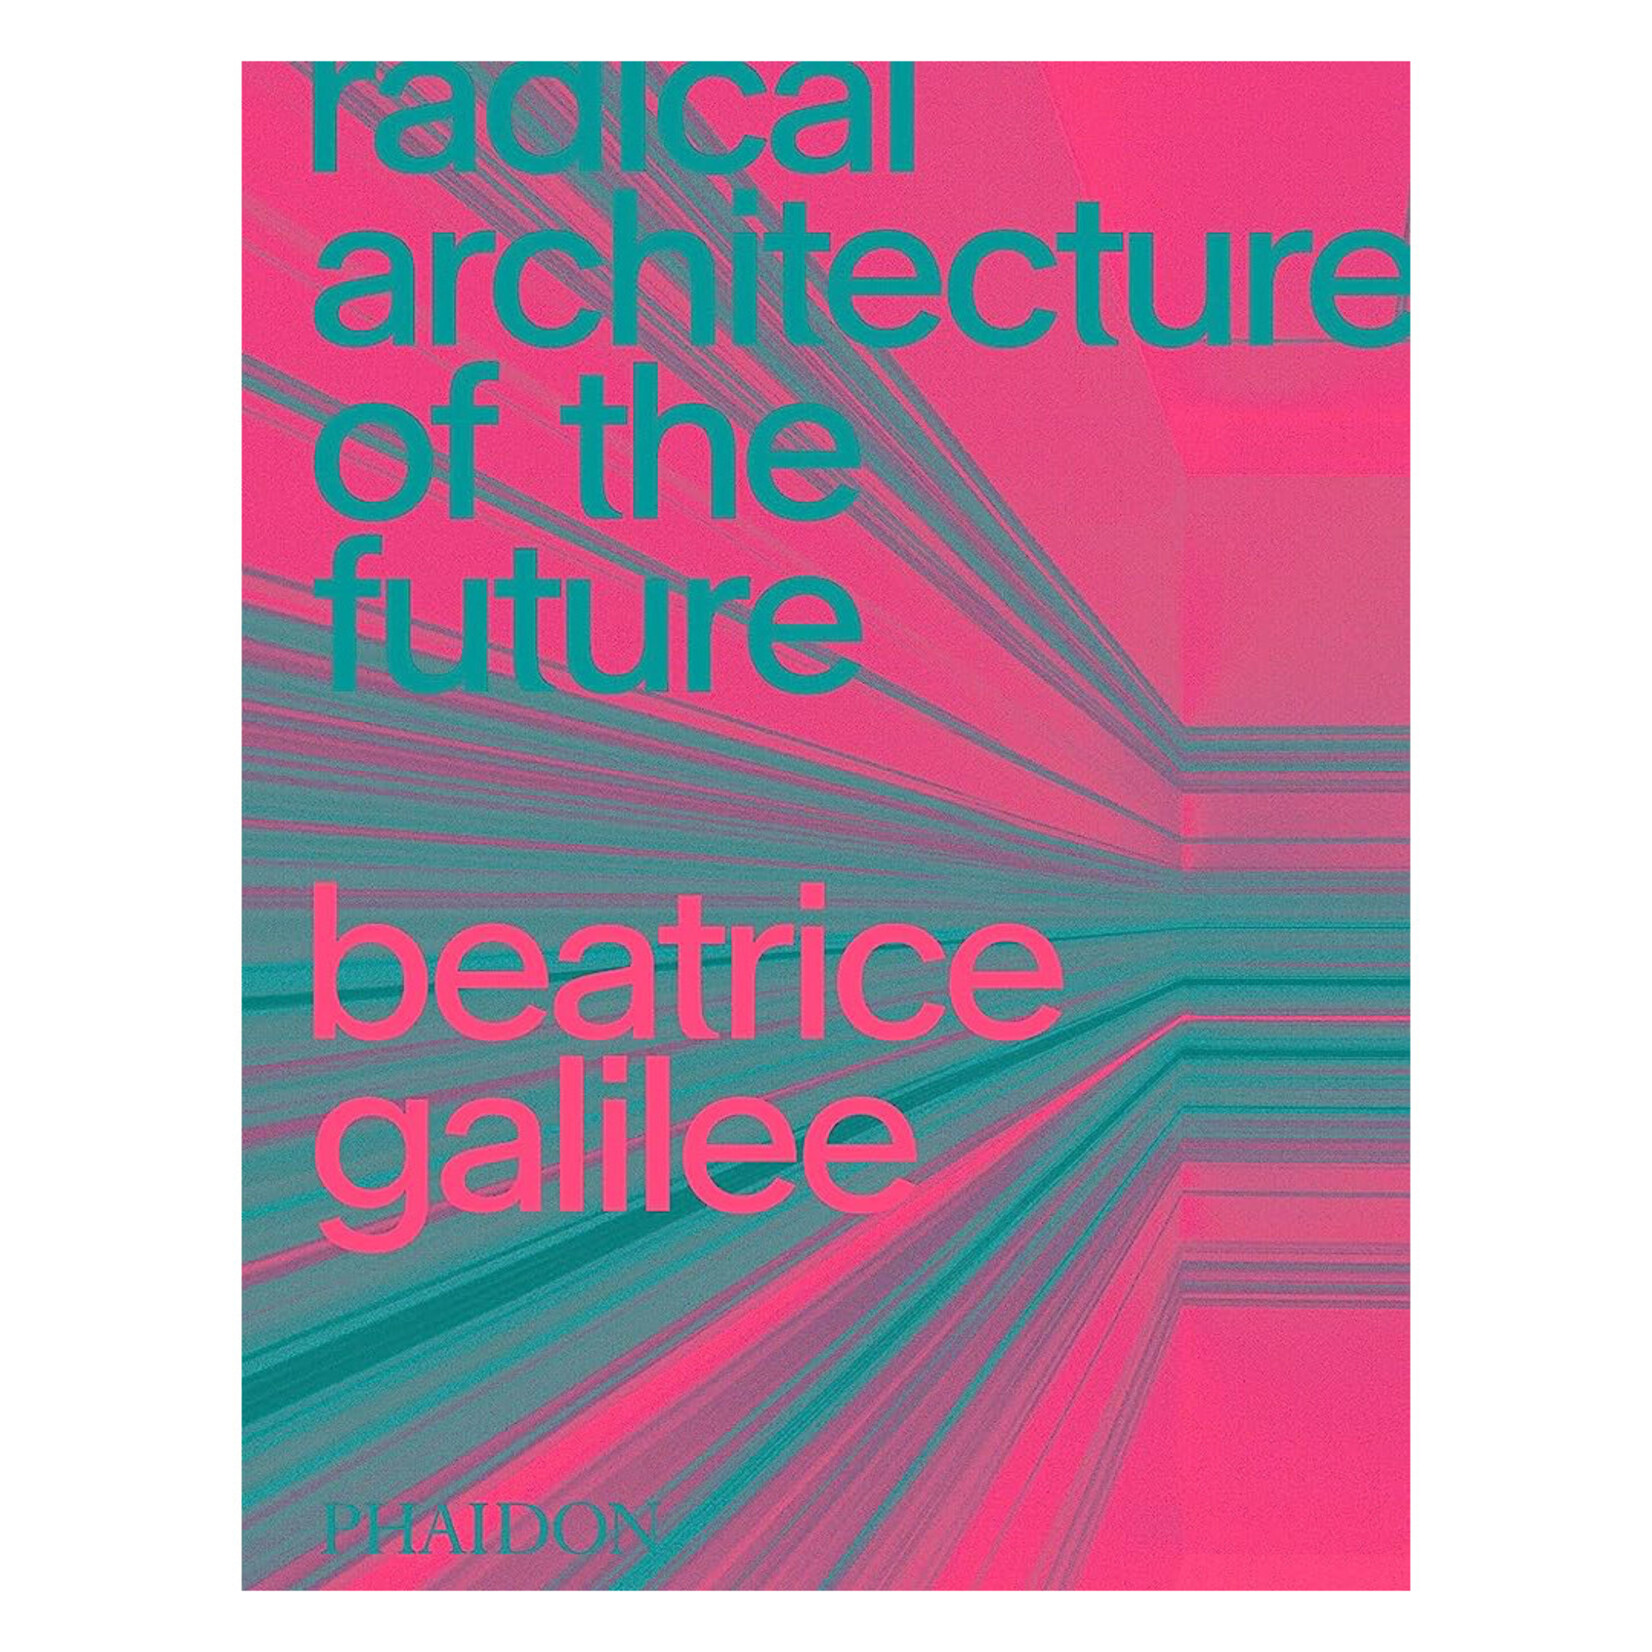 Radical Architecture of the Future